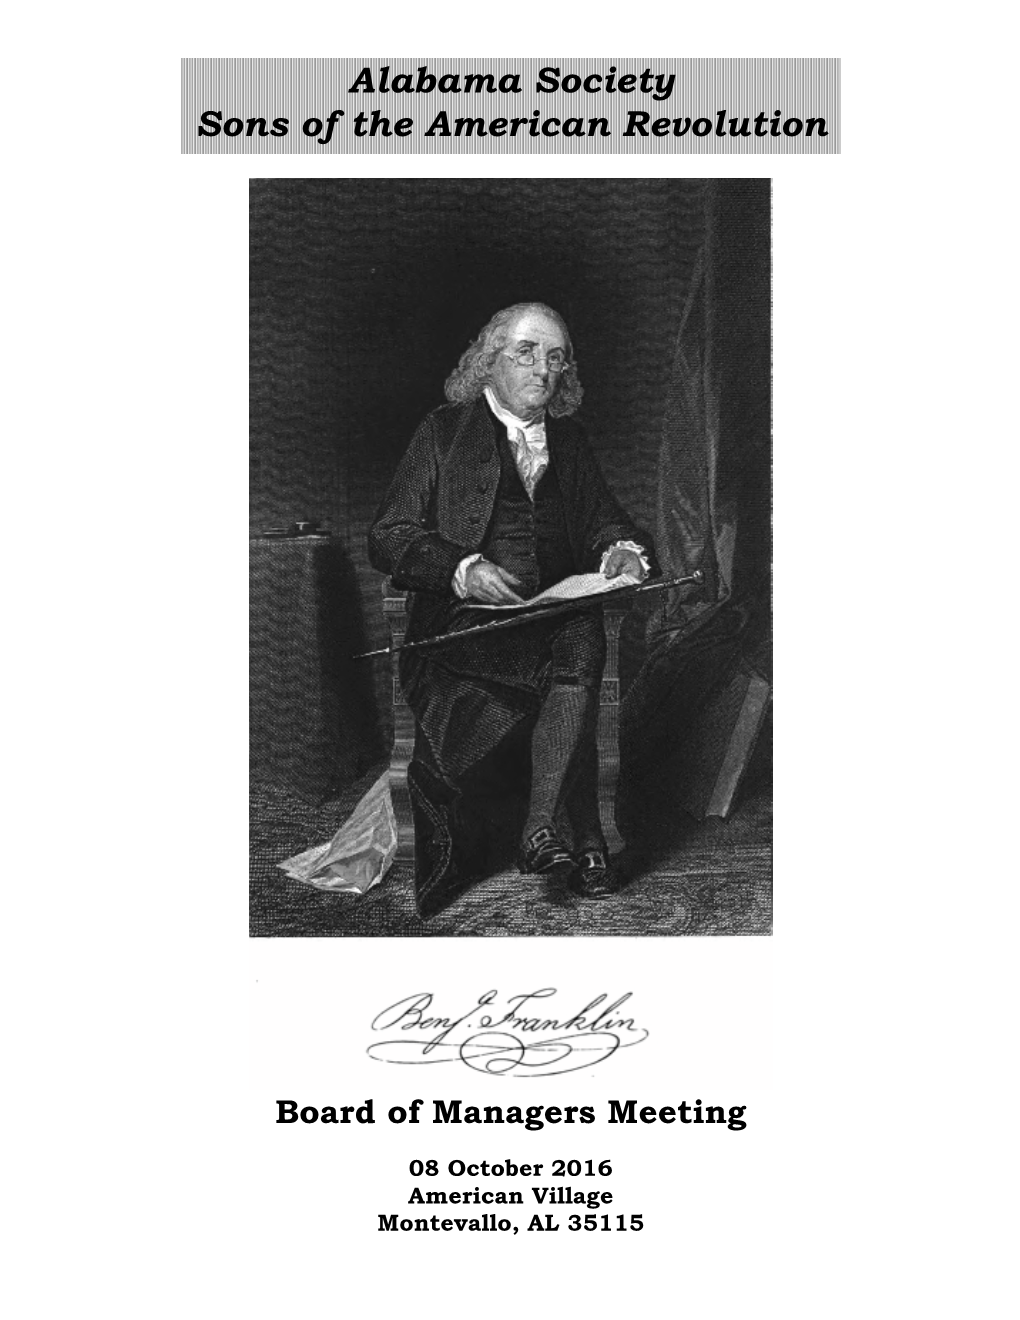 Alabama Society Sons of the American Revolution Fall Board of Managers Meeting – 08 October 2016 AGENDA